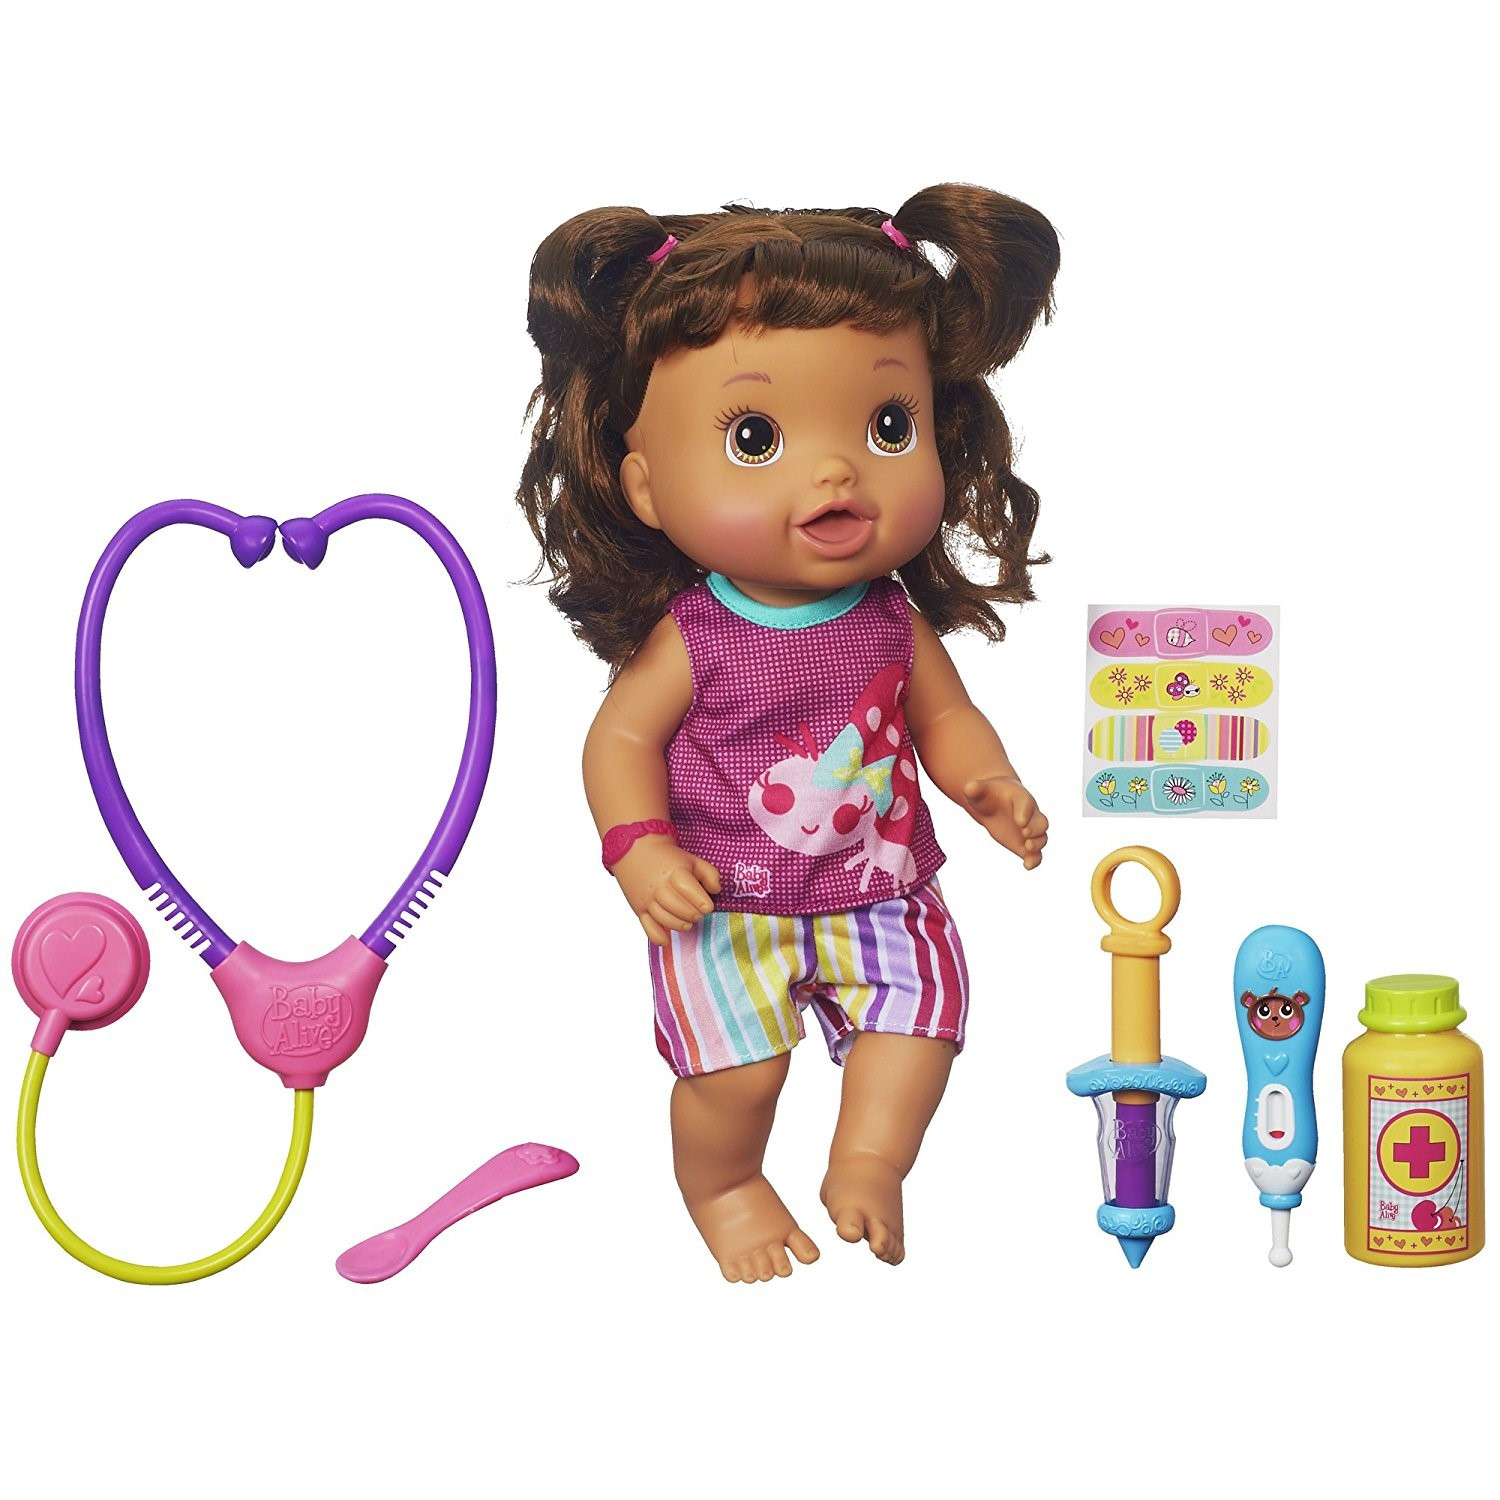 Baby Alive Doll Brown Hair
 Baby Alive Make Me Better Baby Doll Brown Hair